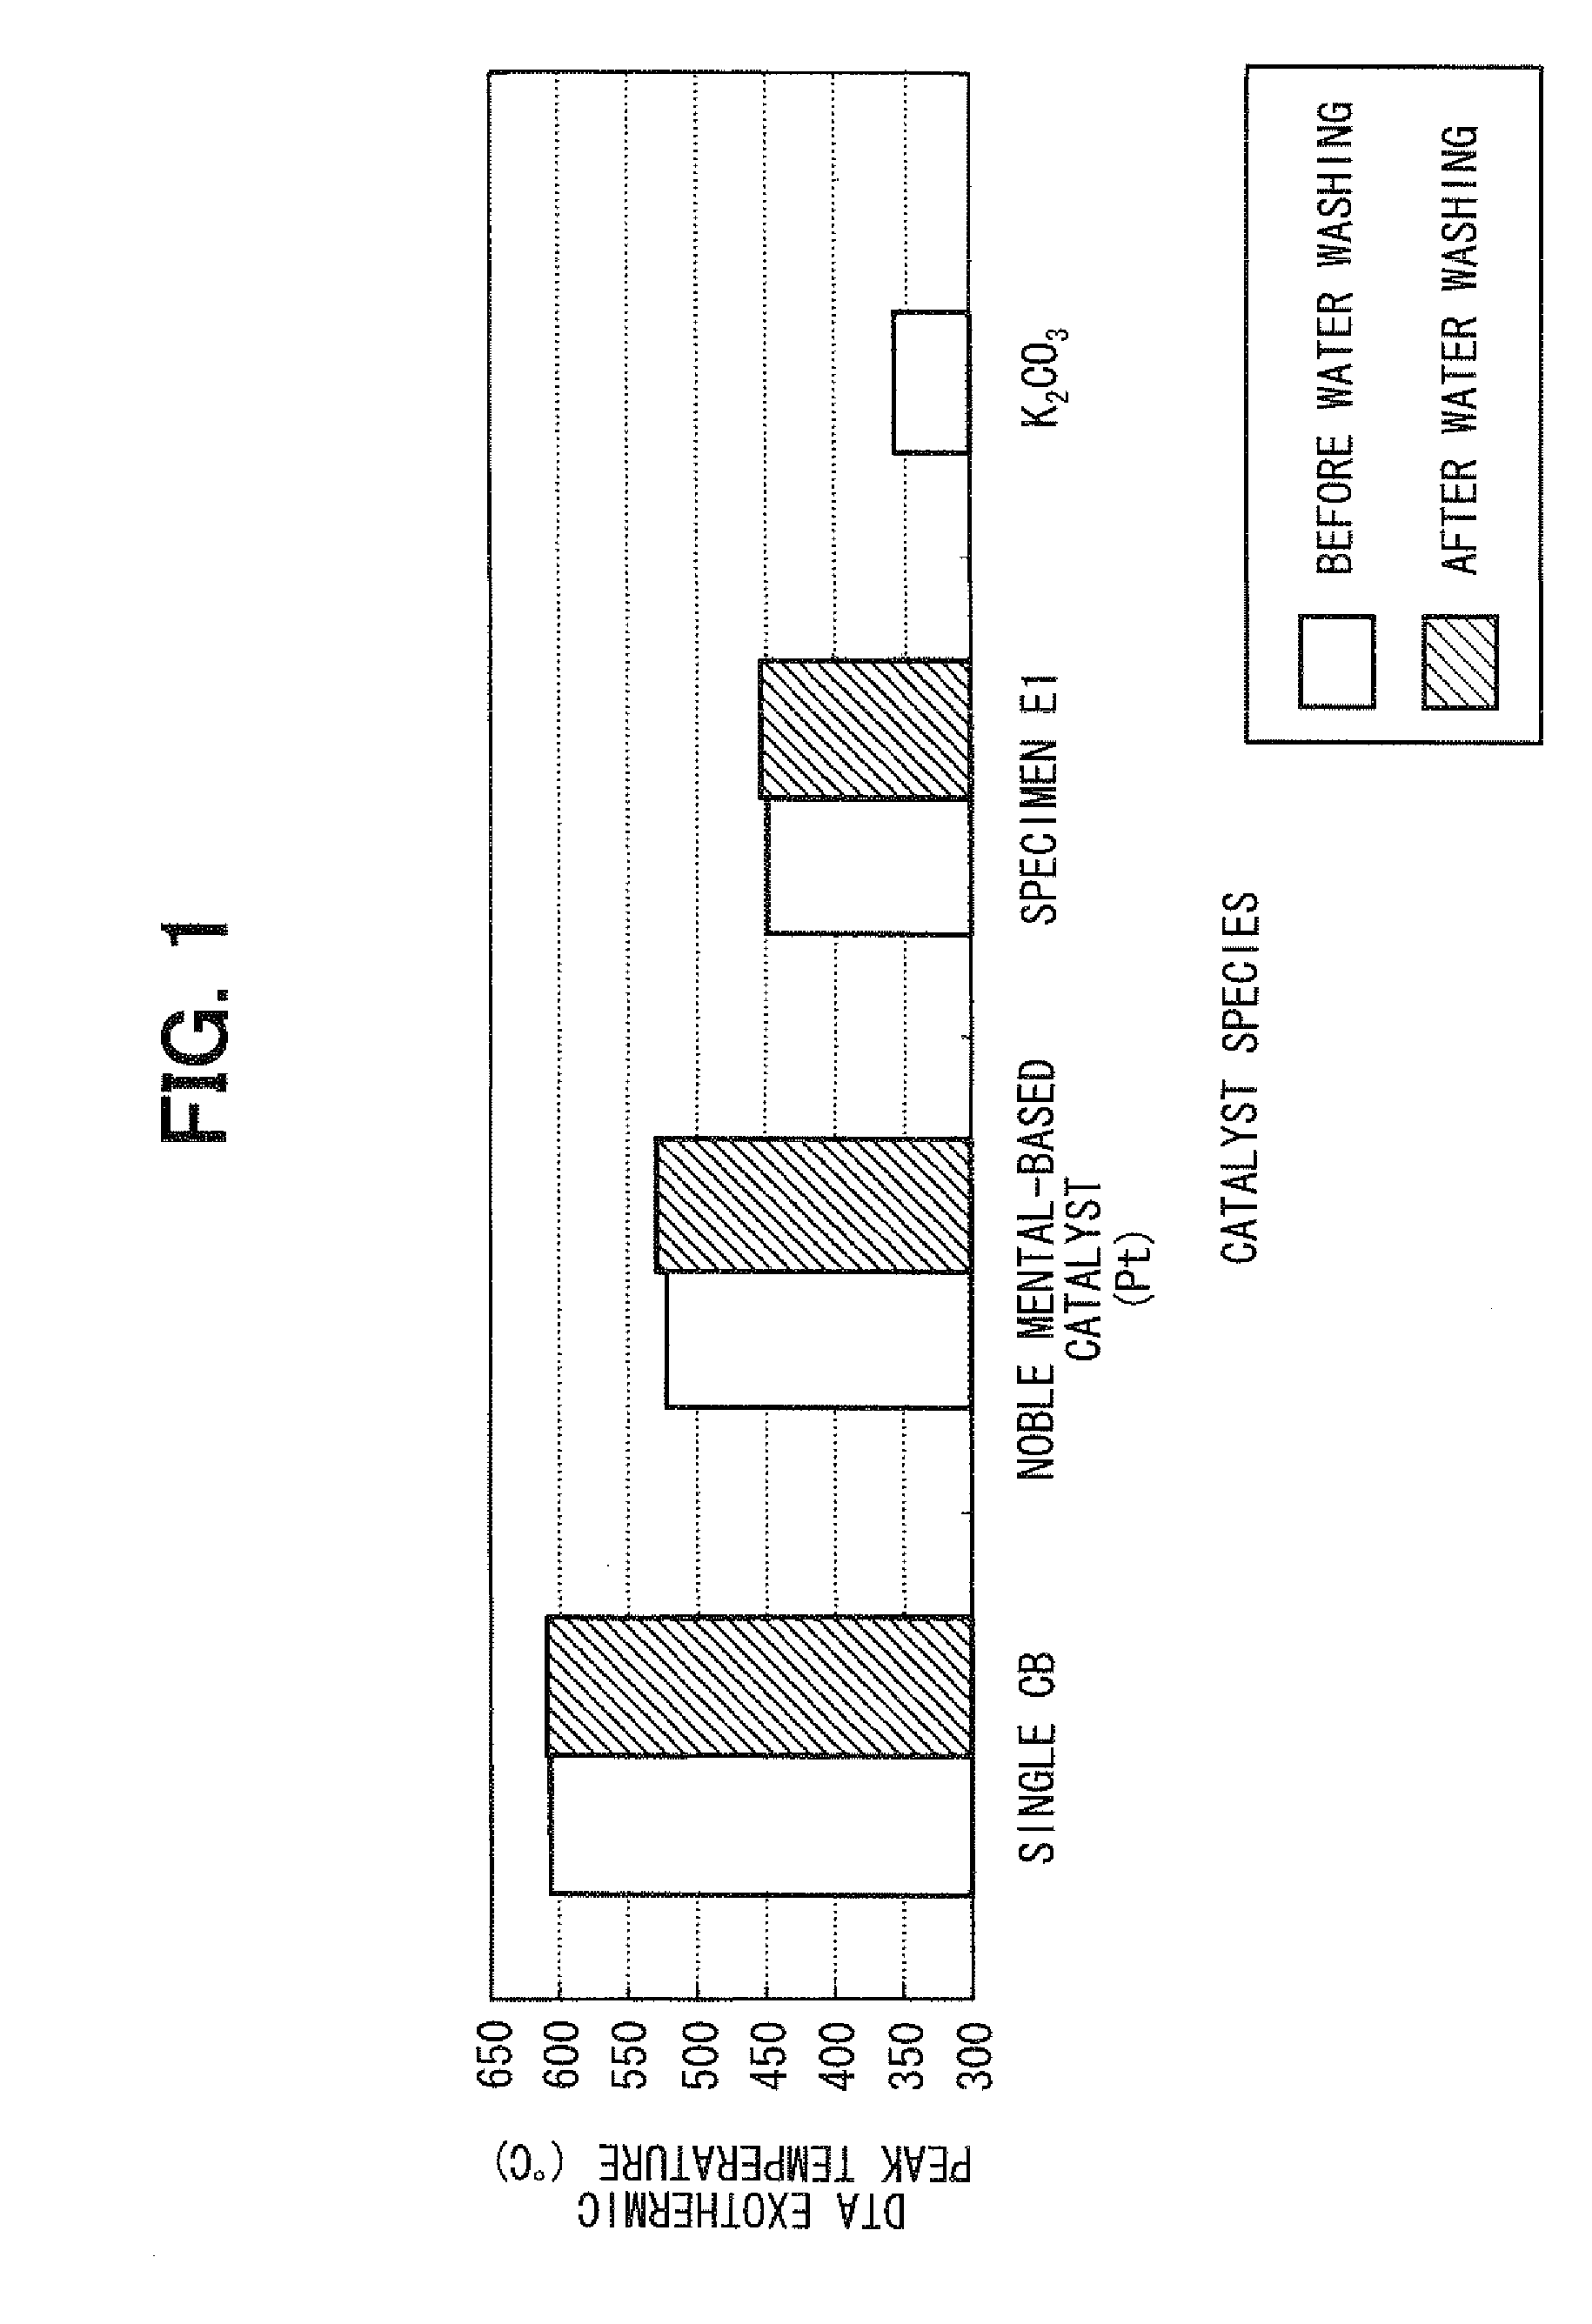 Carbon-based material combustion catalyst, manufacturing method of the same, catalyst carrier, and manufacturing method of the same